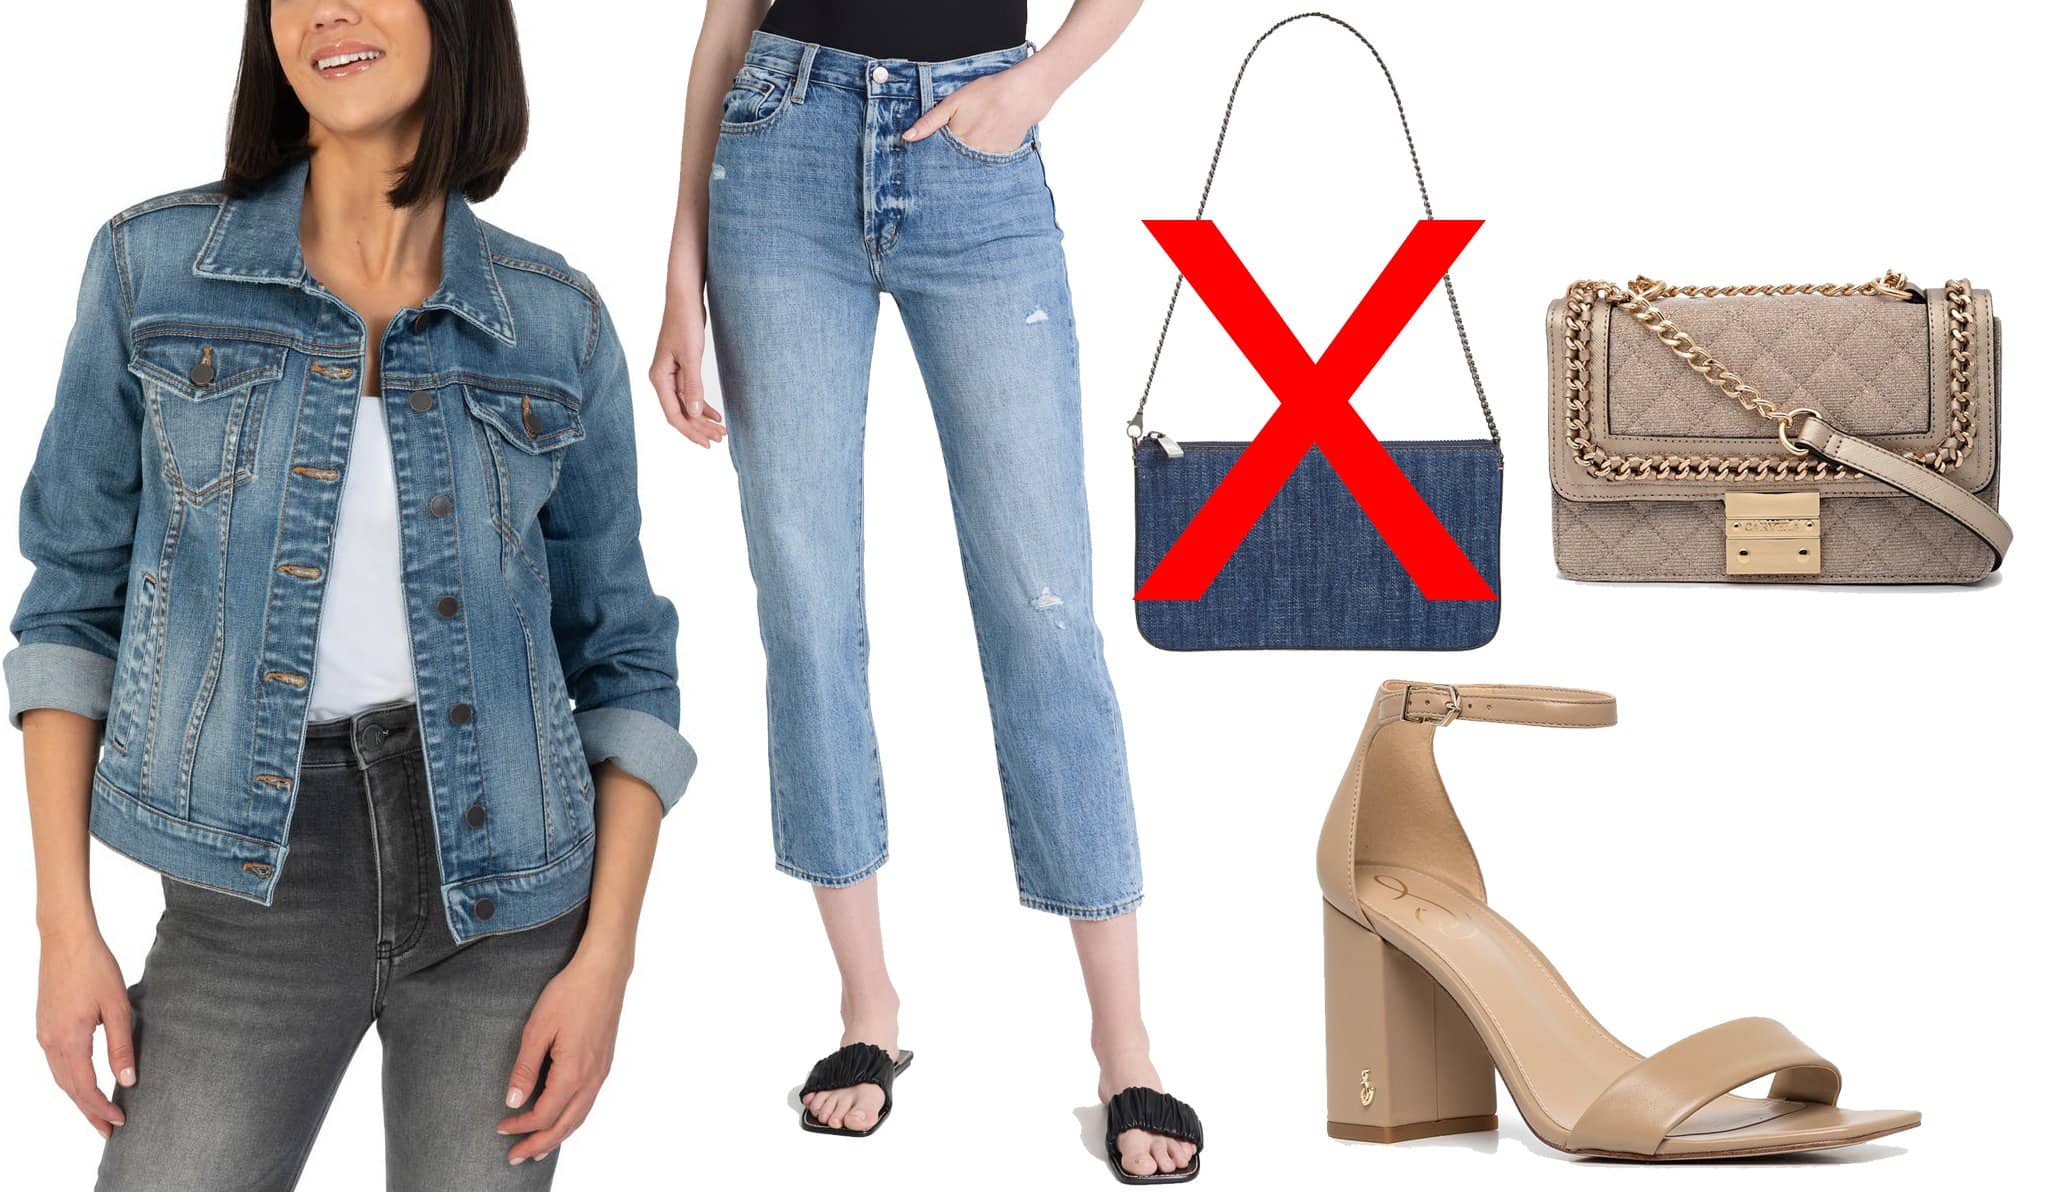 Balanced Denim Bliss: Showcasing Kut from Kloth's Jacqueline Denim Jacket and Pistola Denim's Charlie High Rise Jeans, complemented with a Carvela Bailey quilted shoulder bag and Sam Edelman's open-toe sandals, demonstrating the art of accessorizing a double denim outfit